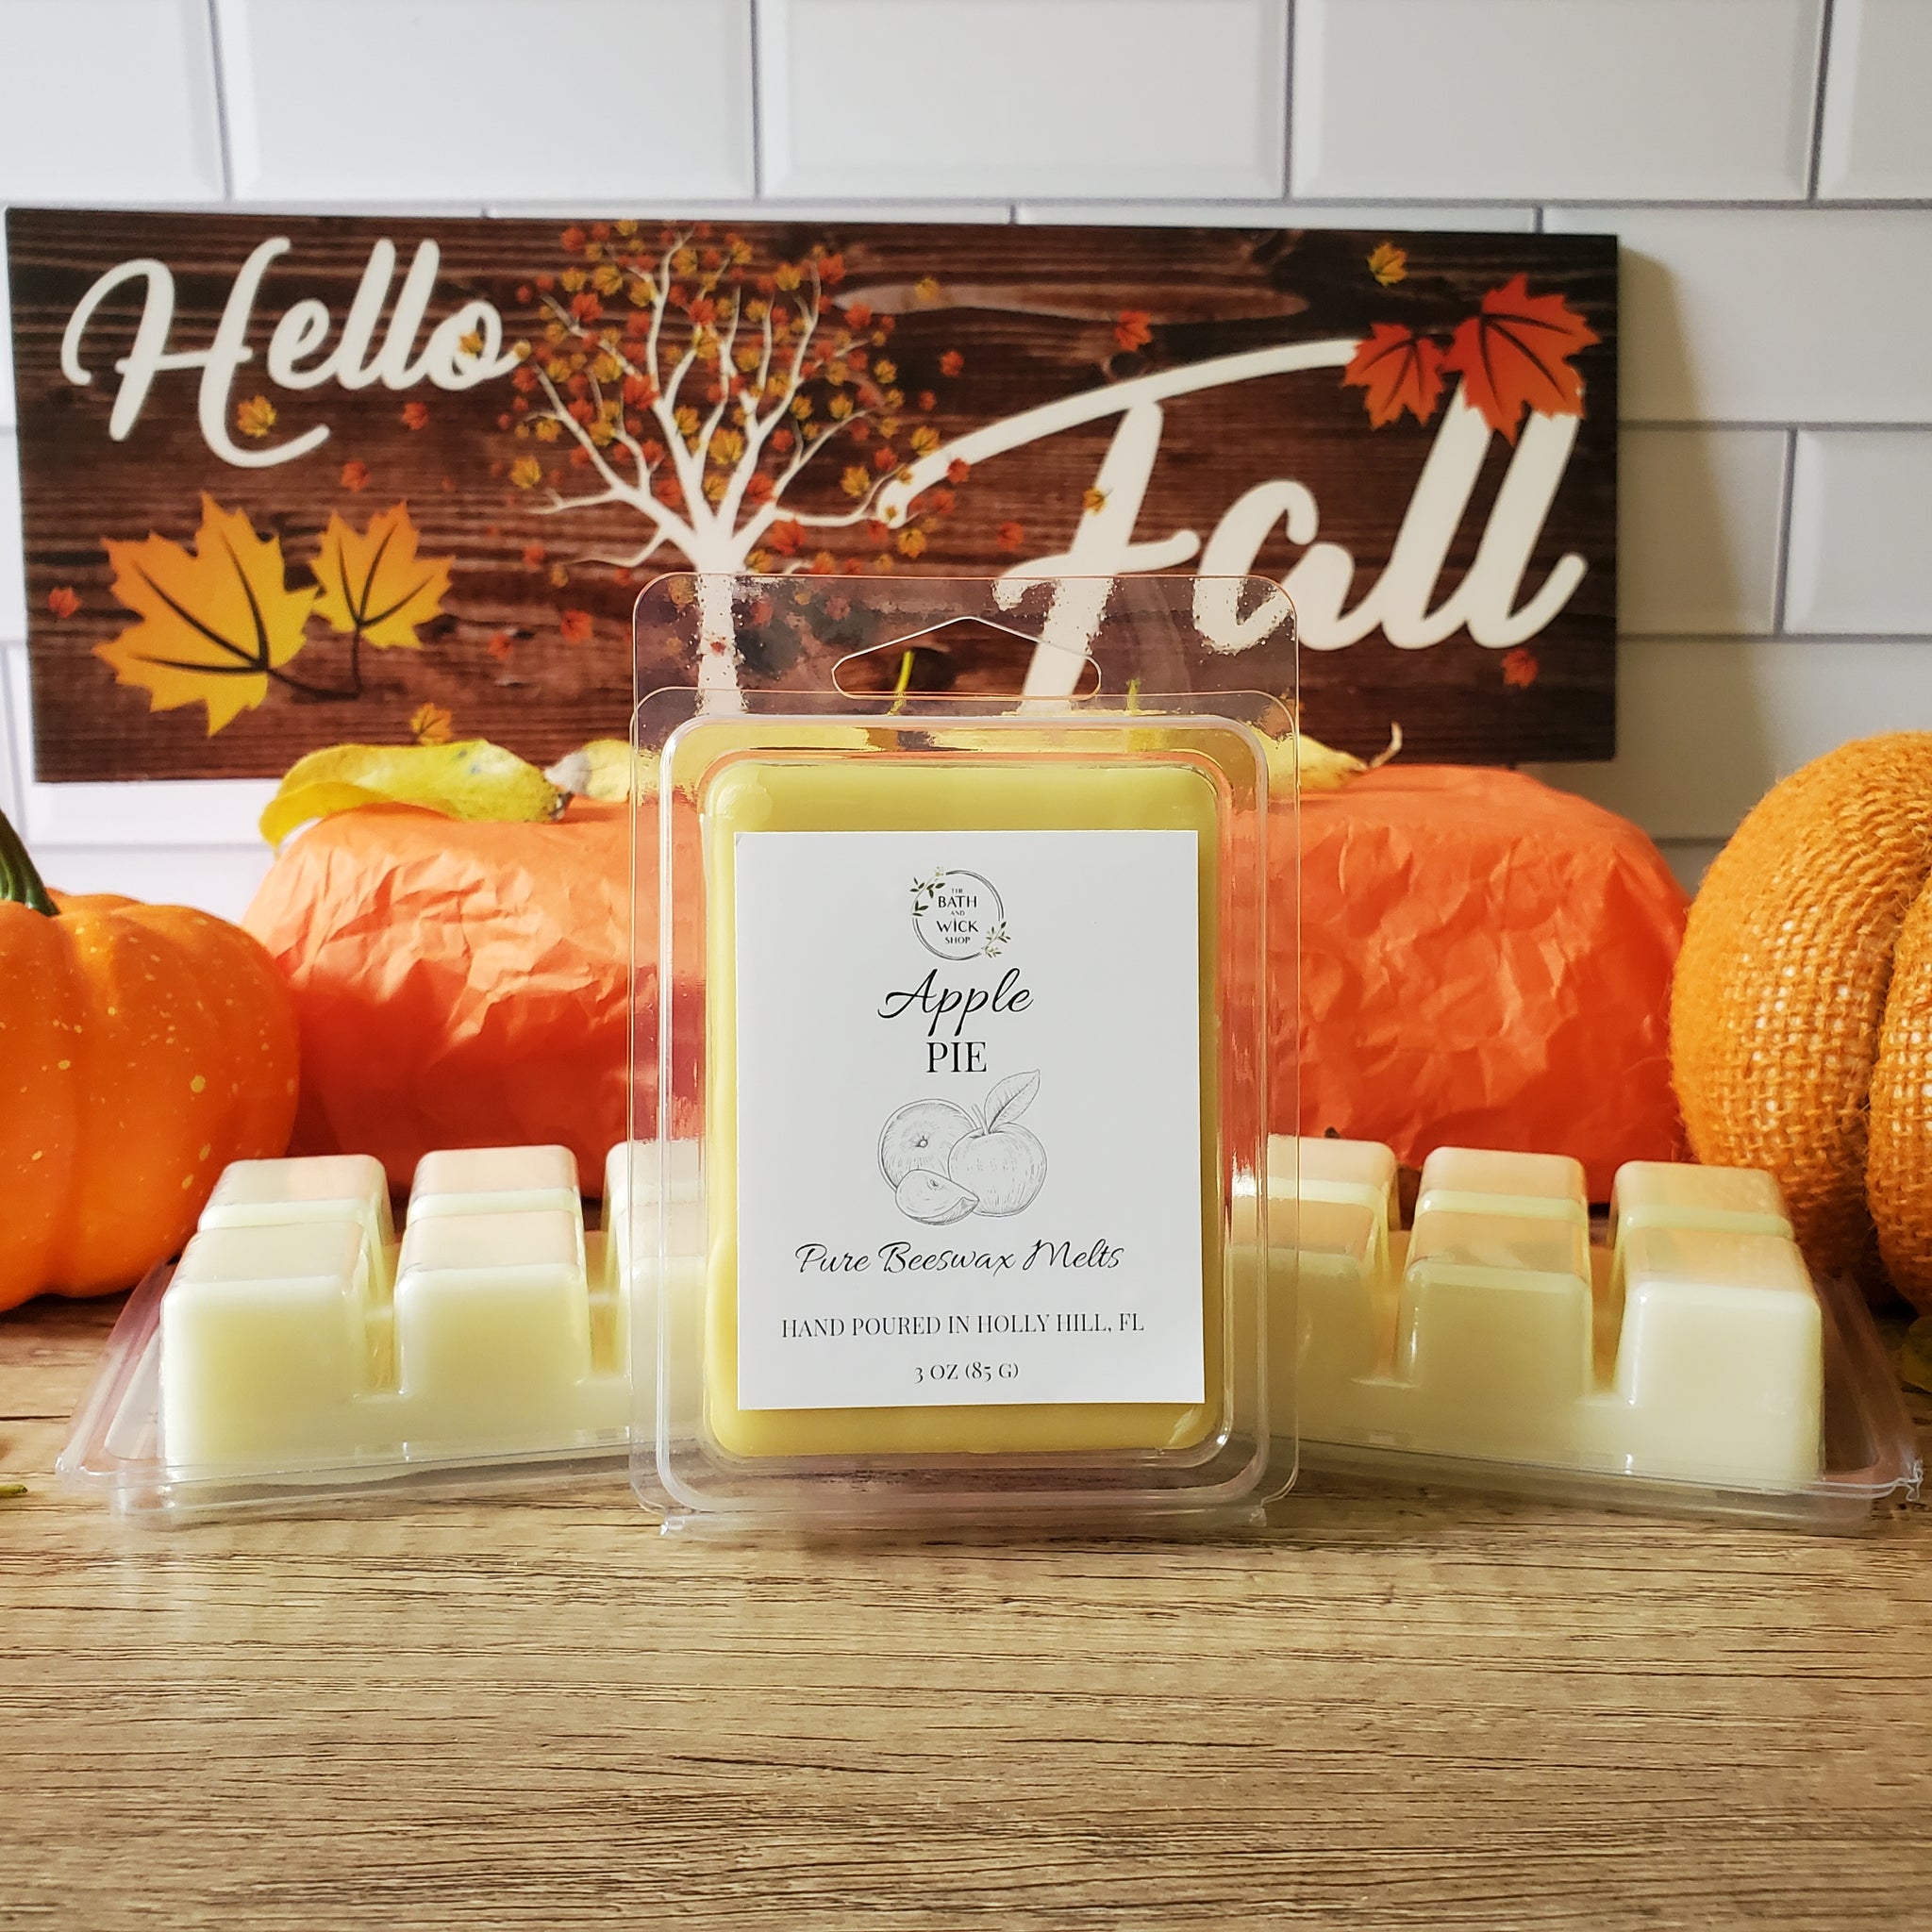 Apple Pie Pure Beeswax Melts